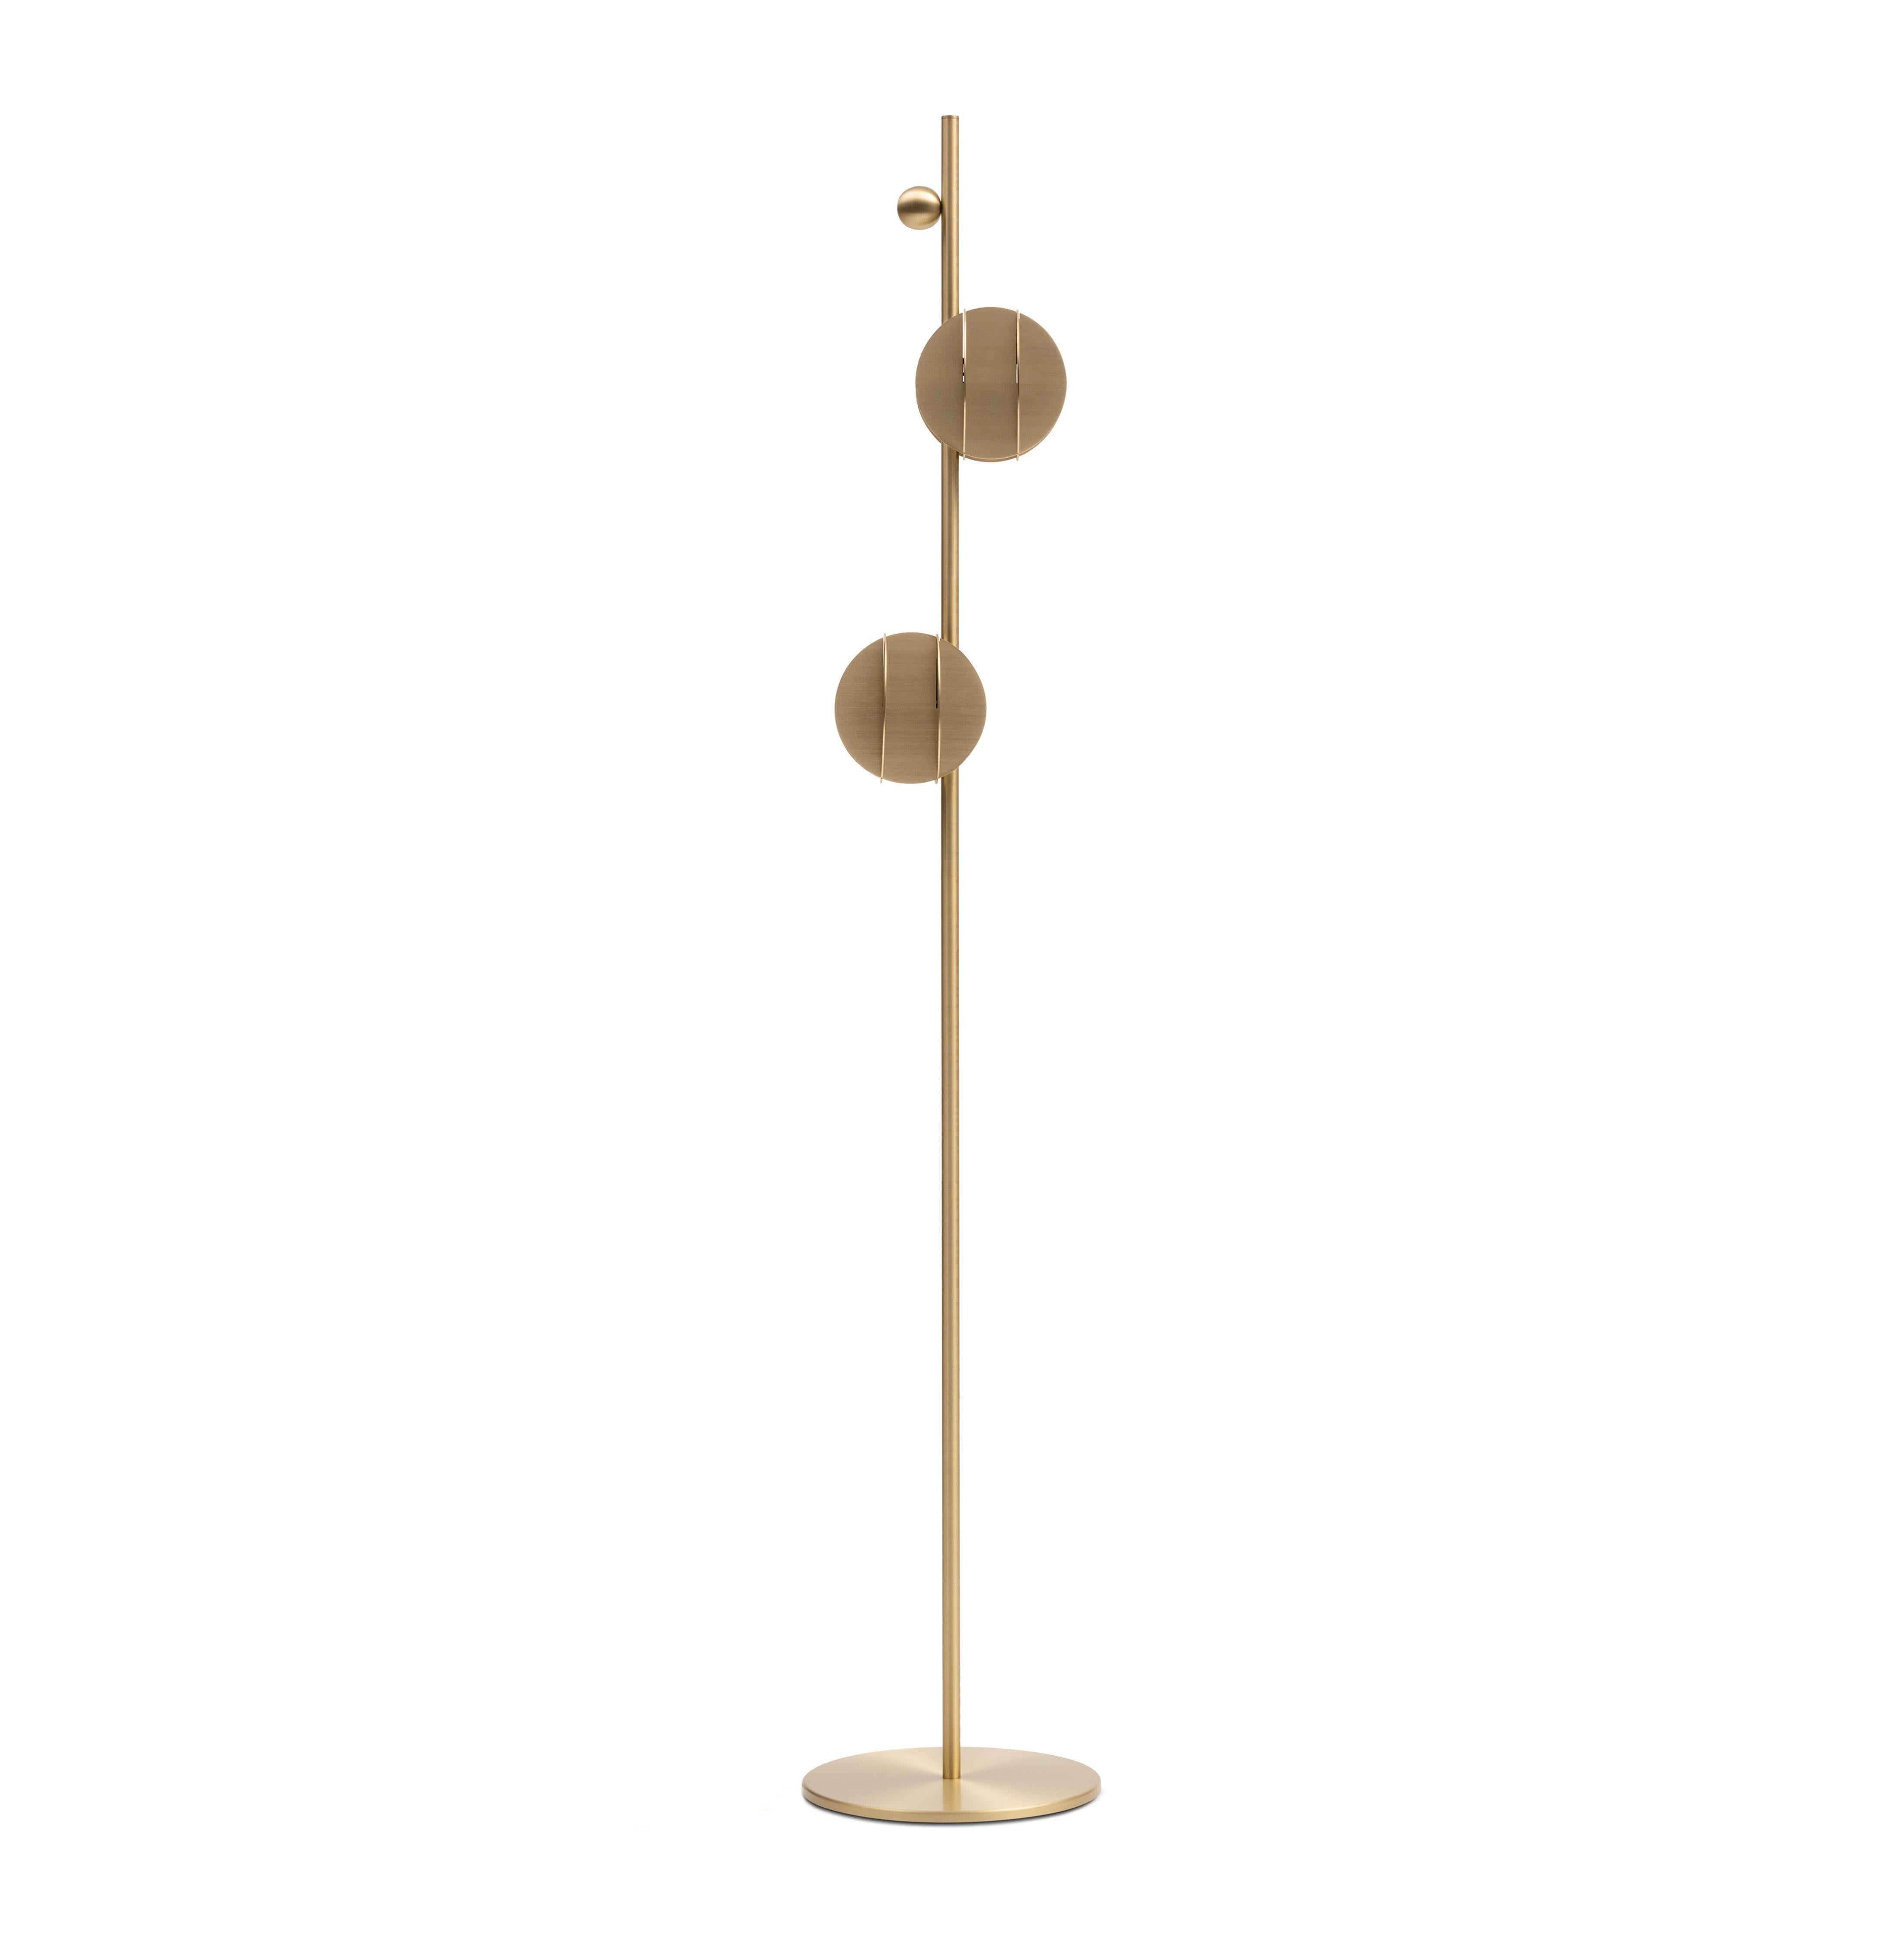 Brand: NOOM
Designer: Kateryna Sokolova
Materials: Brass / Copper / Stainless steel
Dimensions: H 170 cm x W 30 cm x D 30 cm
EU version: 2 x LED 10WG9220 -240V50 Hz
USA version: 2 x LED 10W G9 110V 60 Hz.

EL collection of lighting is inspired by